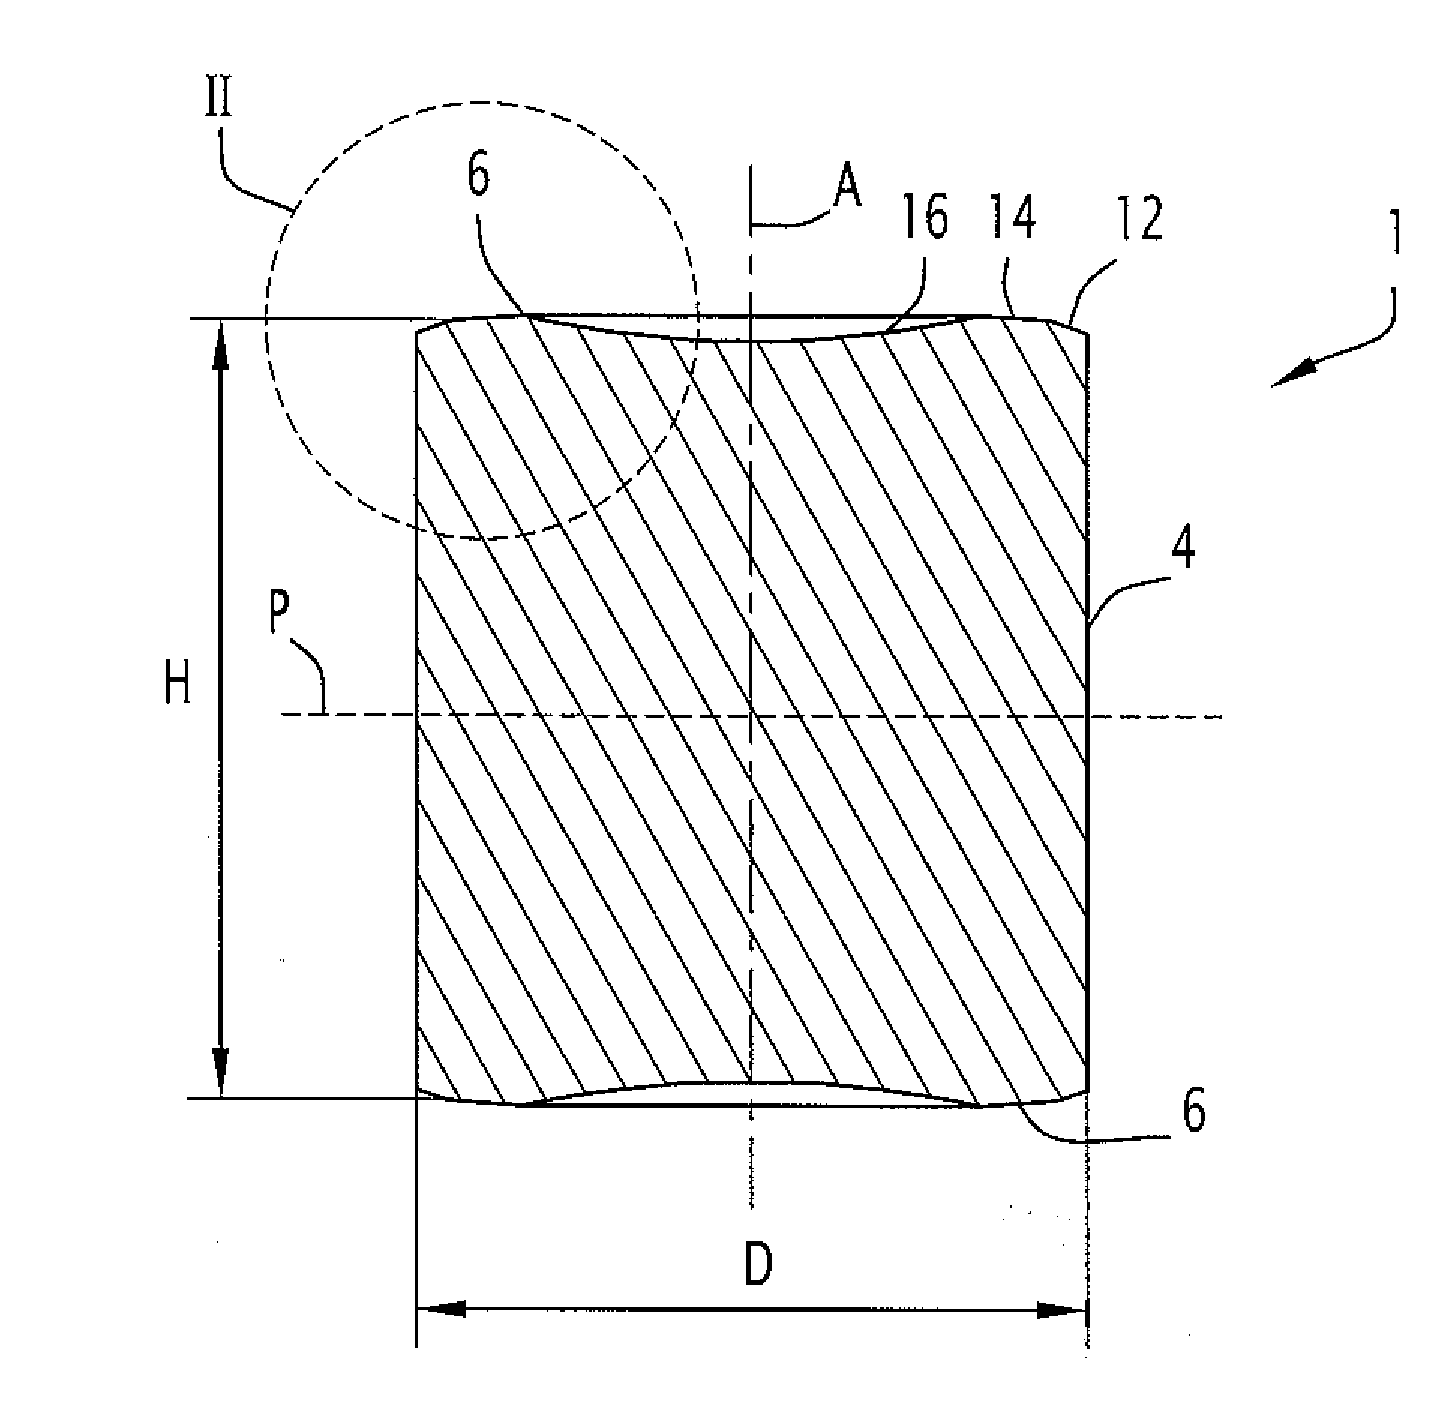 Nuclear reactor green and sintered fuel pellets, corresponding fuel rod and fuel assembly